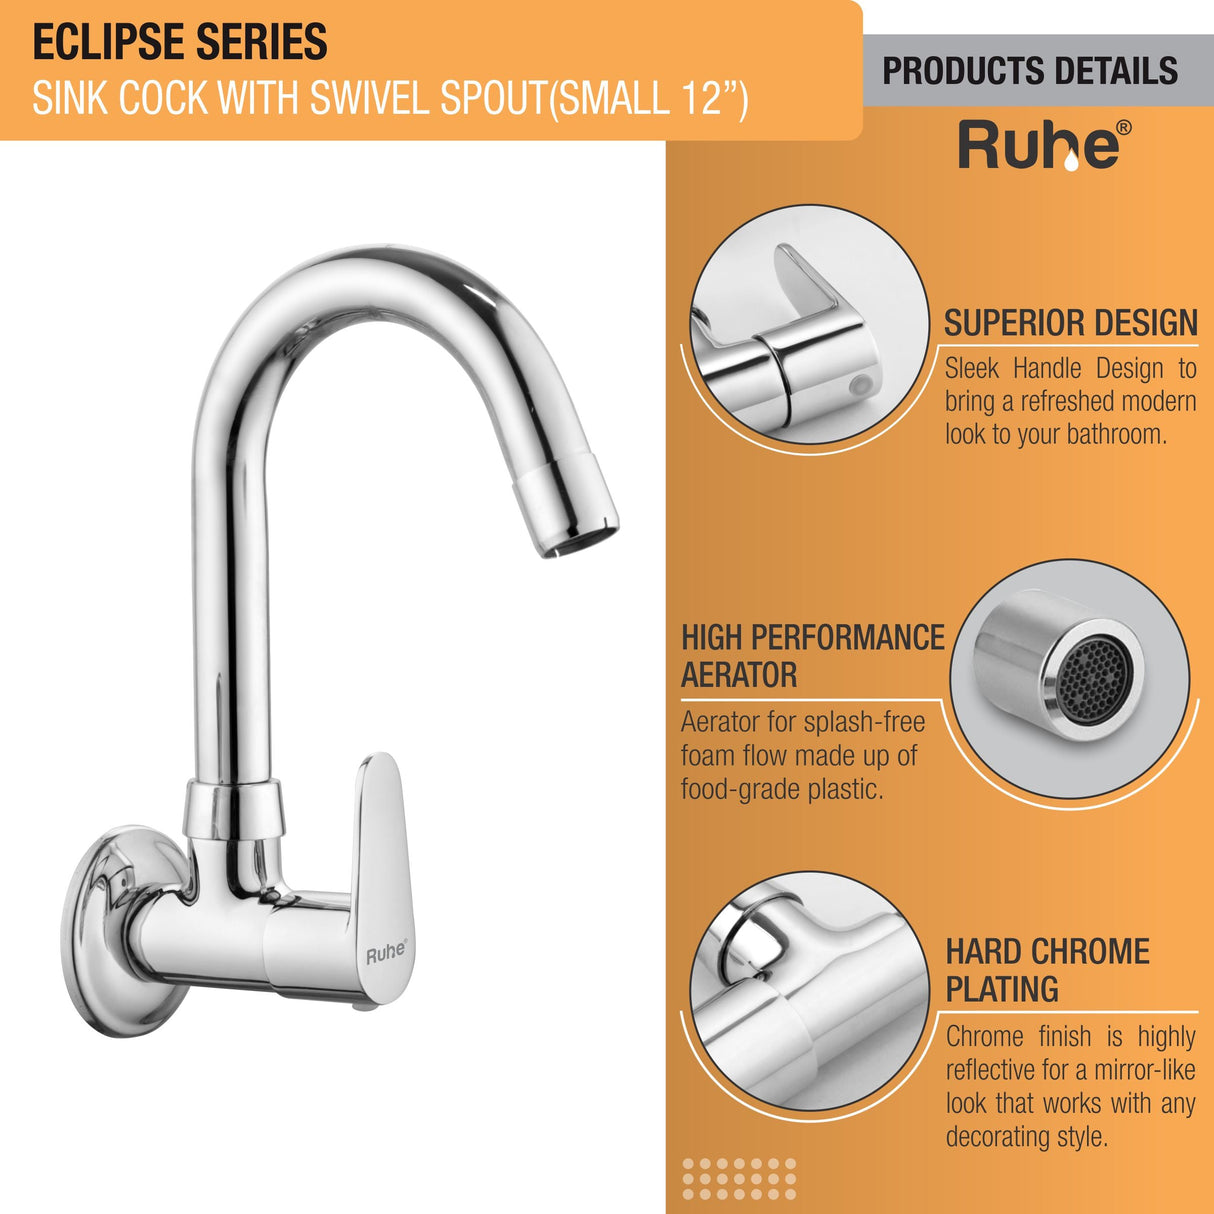 Eclipse Sink Tap With Small (12 inches) Round Swivel Spout Faucet product details